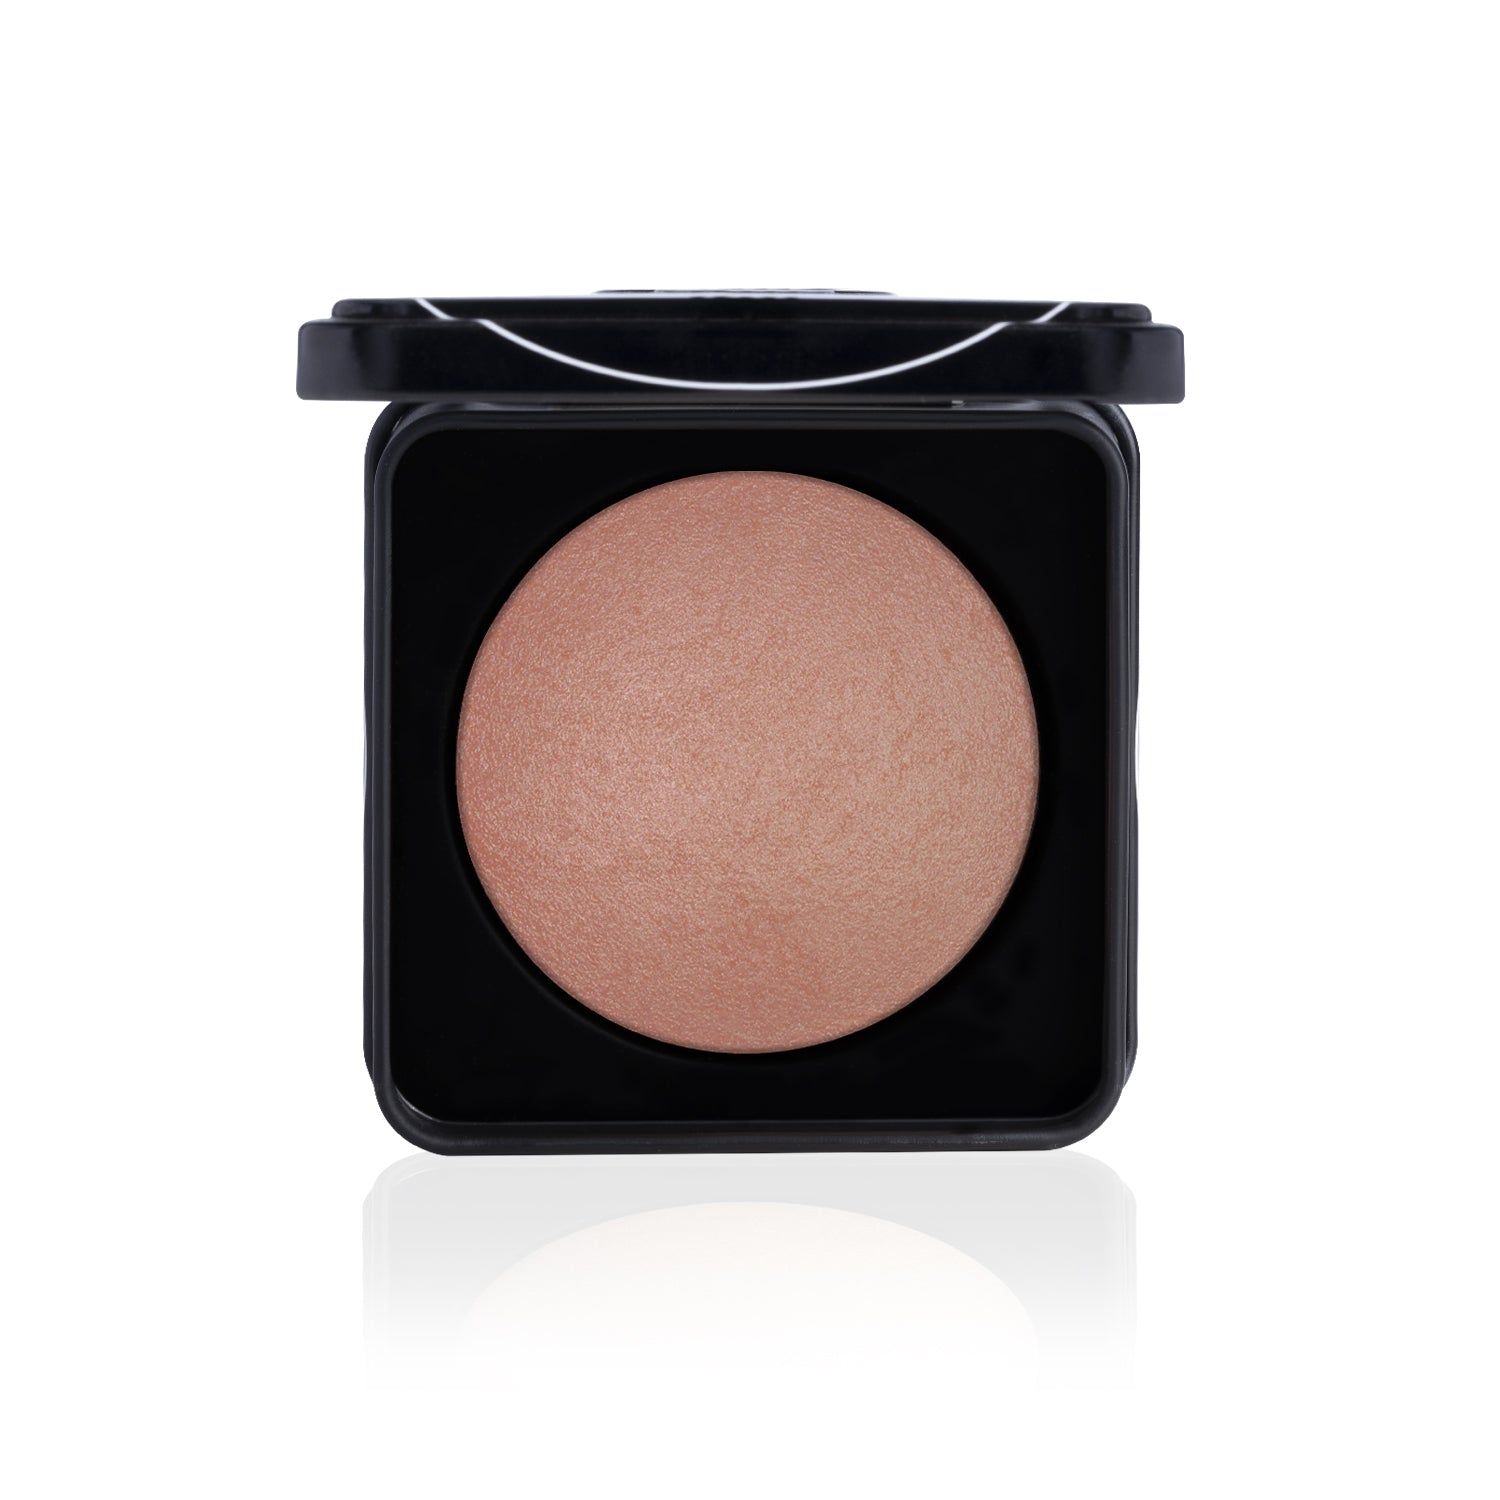 PAC Cosmetics Baked Highlighter #Size_7.5 gm+#Color_Worldwide Hit